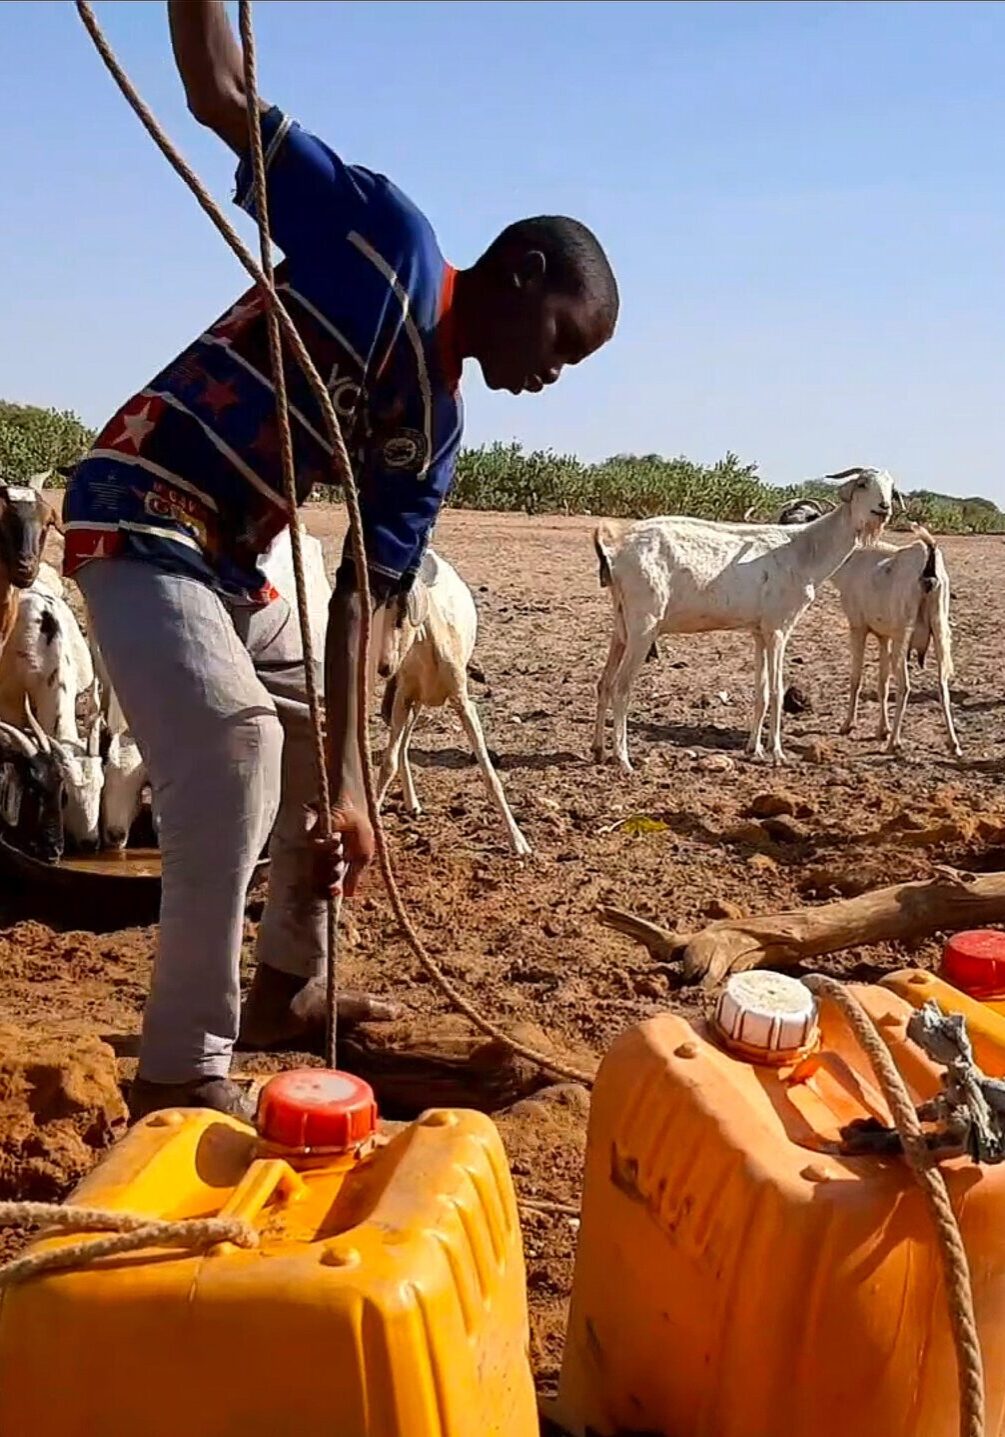 Ménaka Region, Tassassat village, Mali. A man draws water. In this village, the ICRC has installed a watering place to support the villagers who are affected by the combined effects of conflict and climate change.